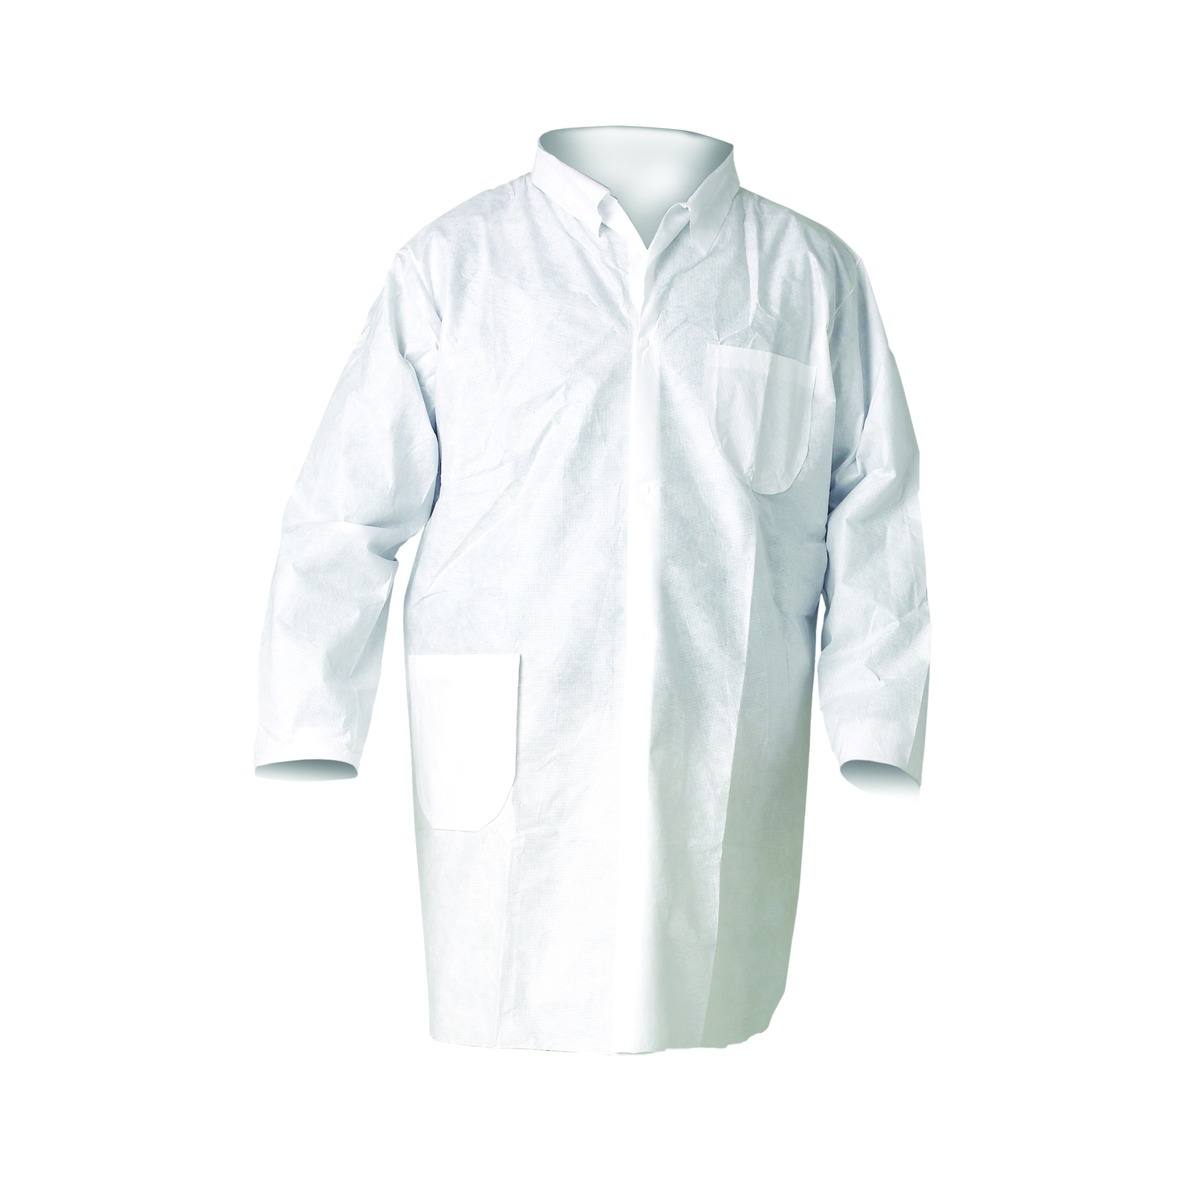 Kimberly-Clark Professional™ Large White KleenGuard™ A20 SMS Disposable Lab Coat (Availability restrictions apply.)